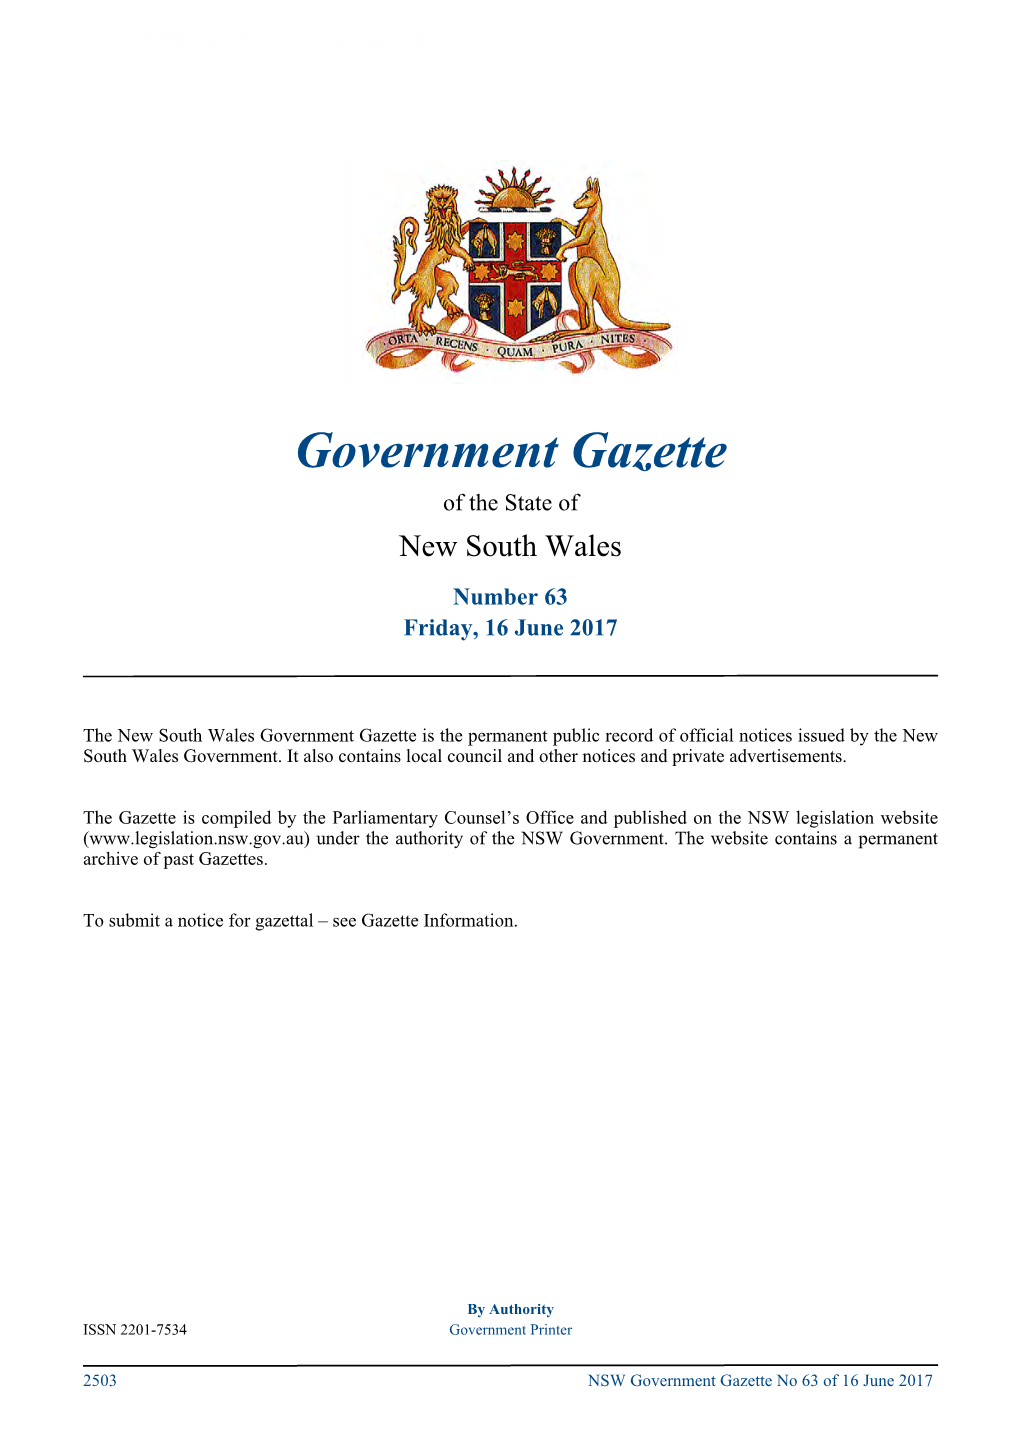 Government Gazette No 63 of 16 June 2017 Government Notices GOVERNMENT NOTICES